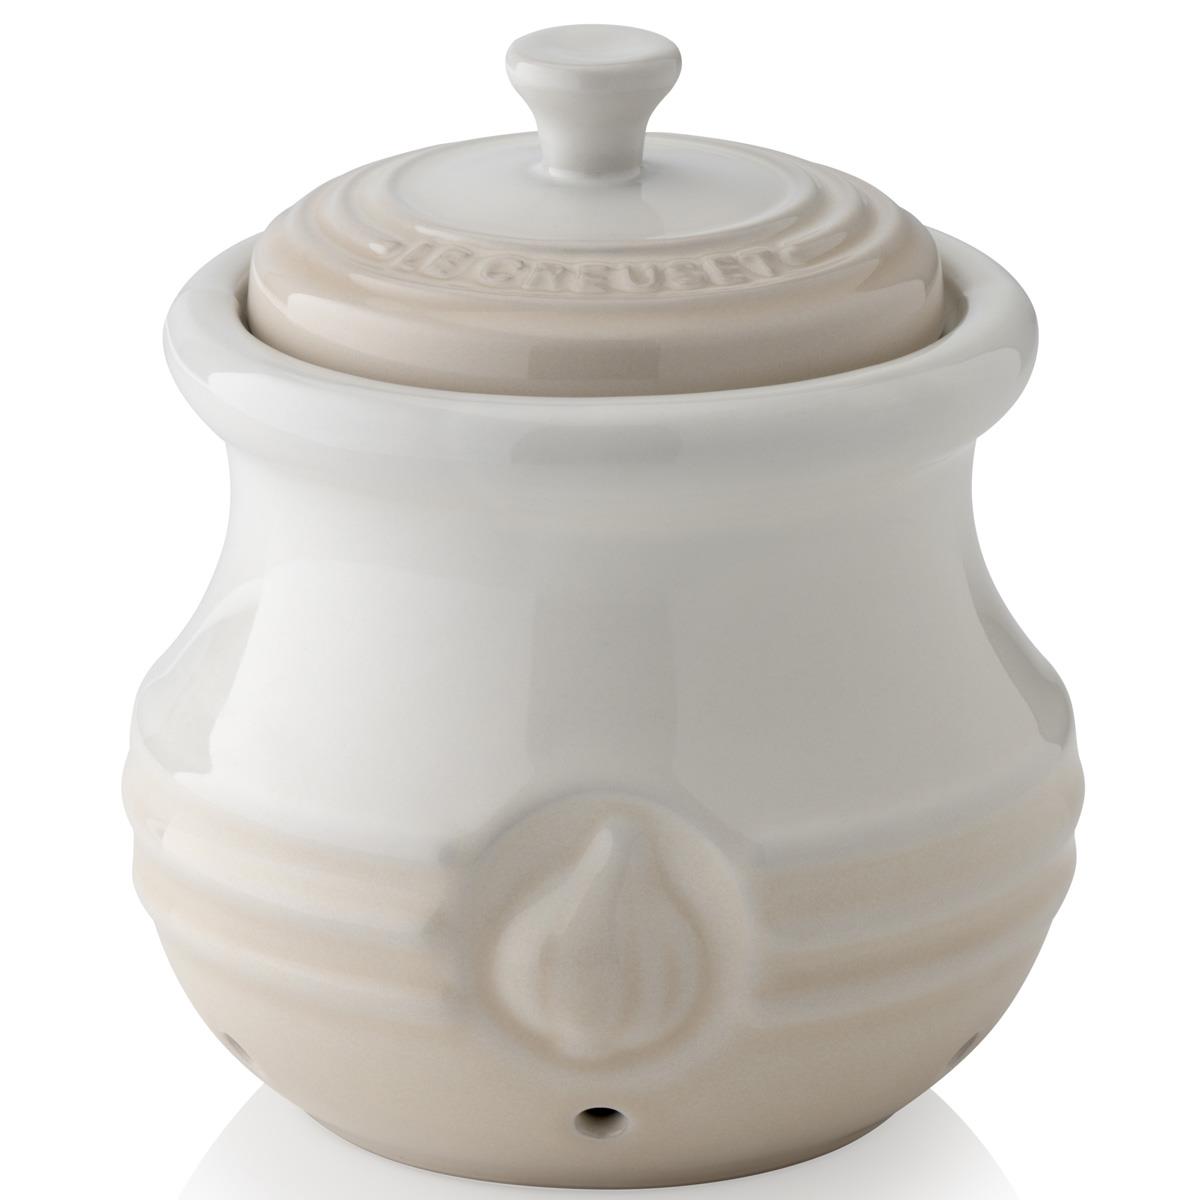 What are the size specs of the le creuset garlic keeper?